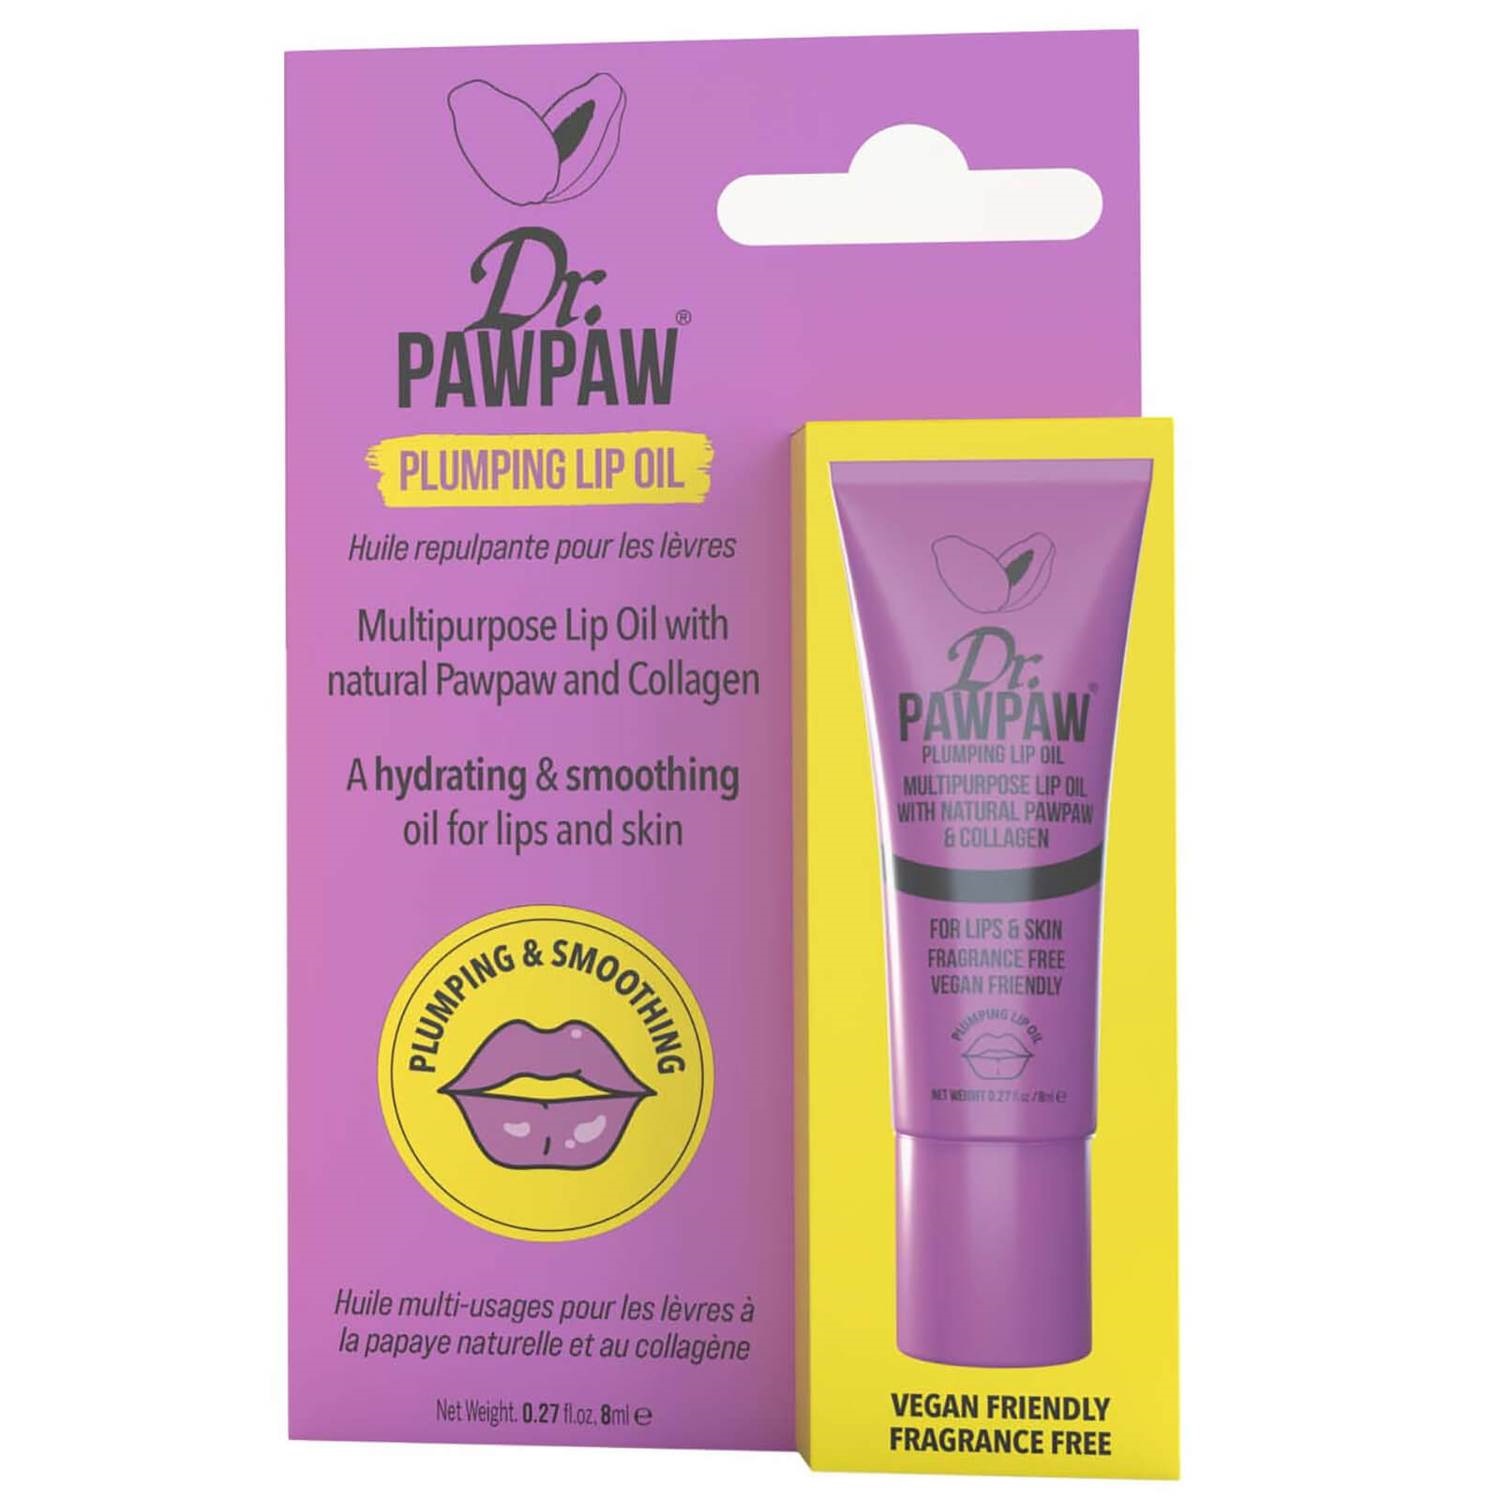 Dr PawPaw Plumping Lip Oil will give you instant results